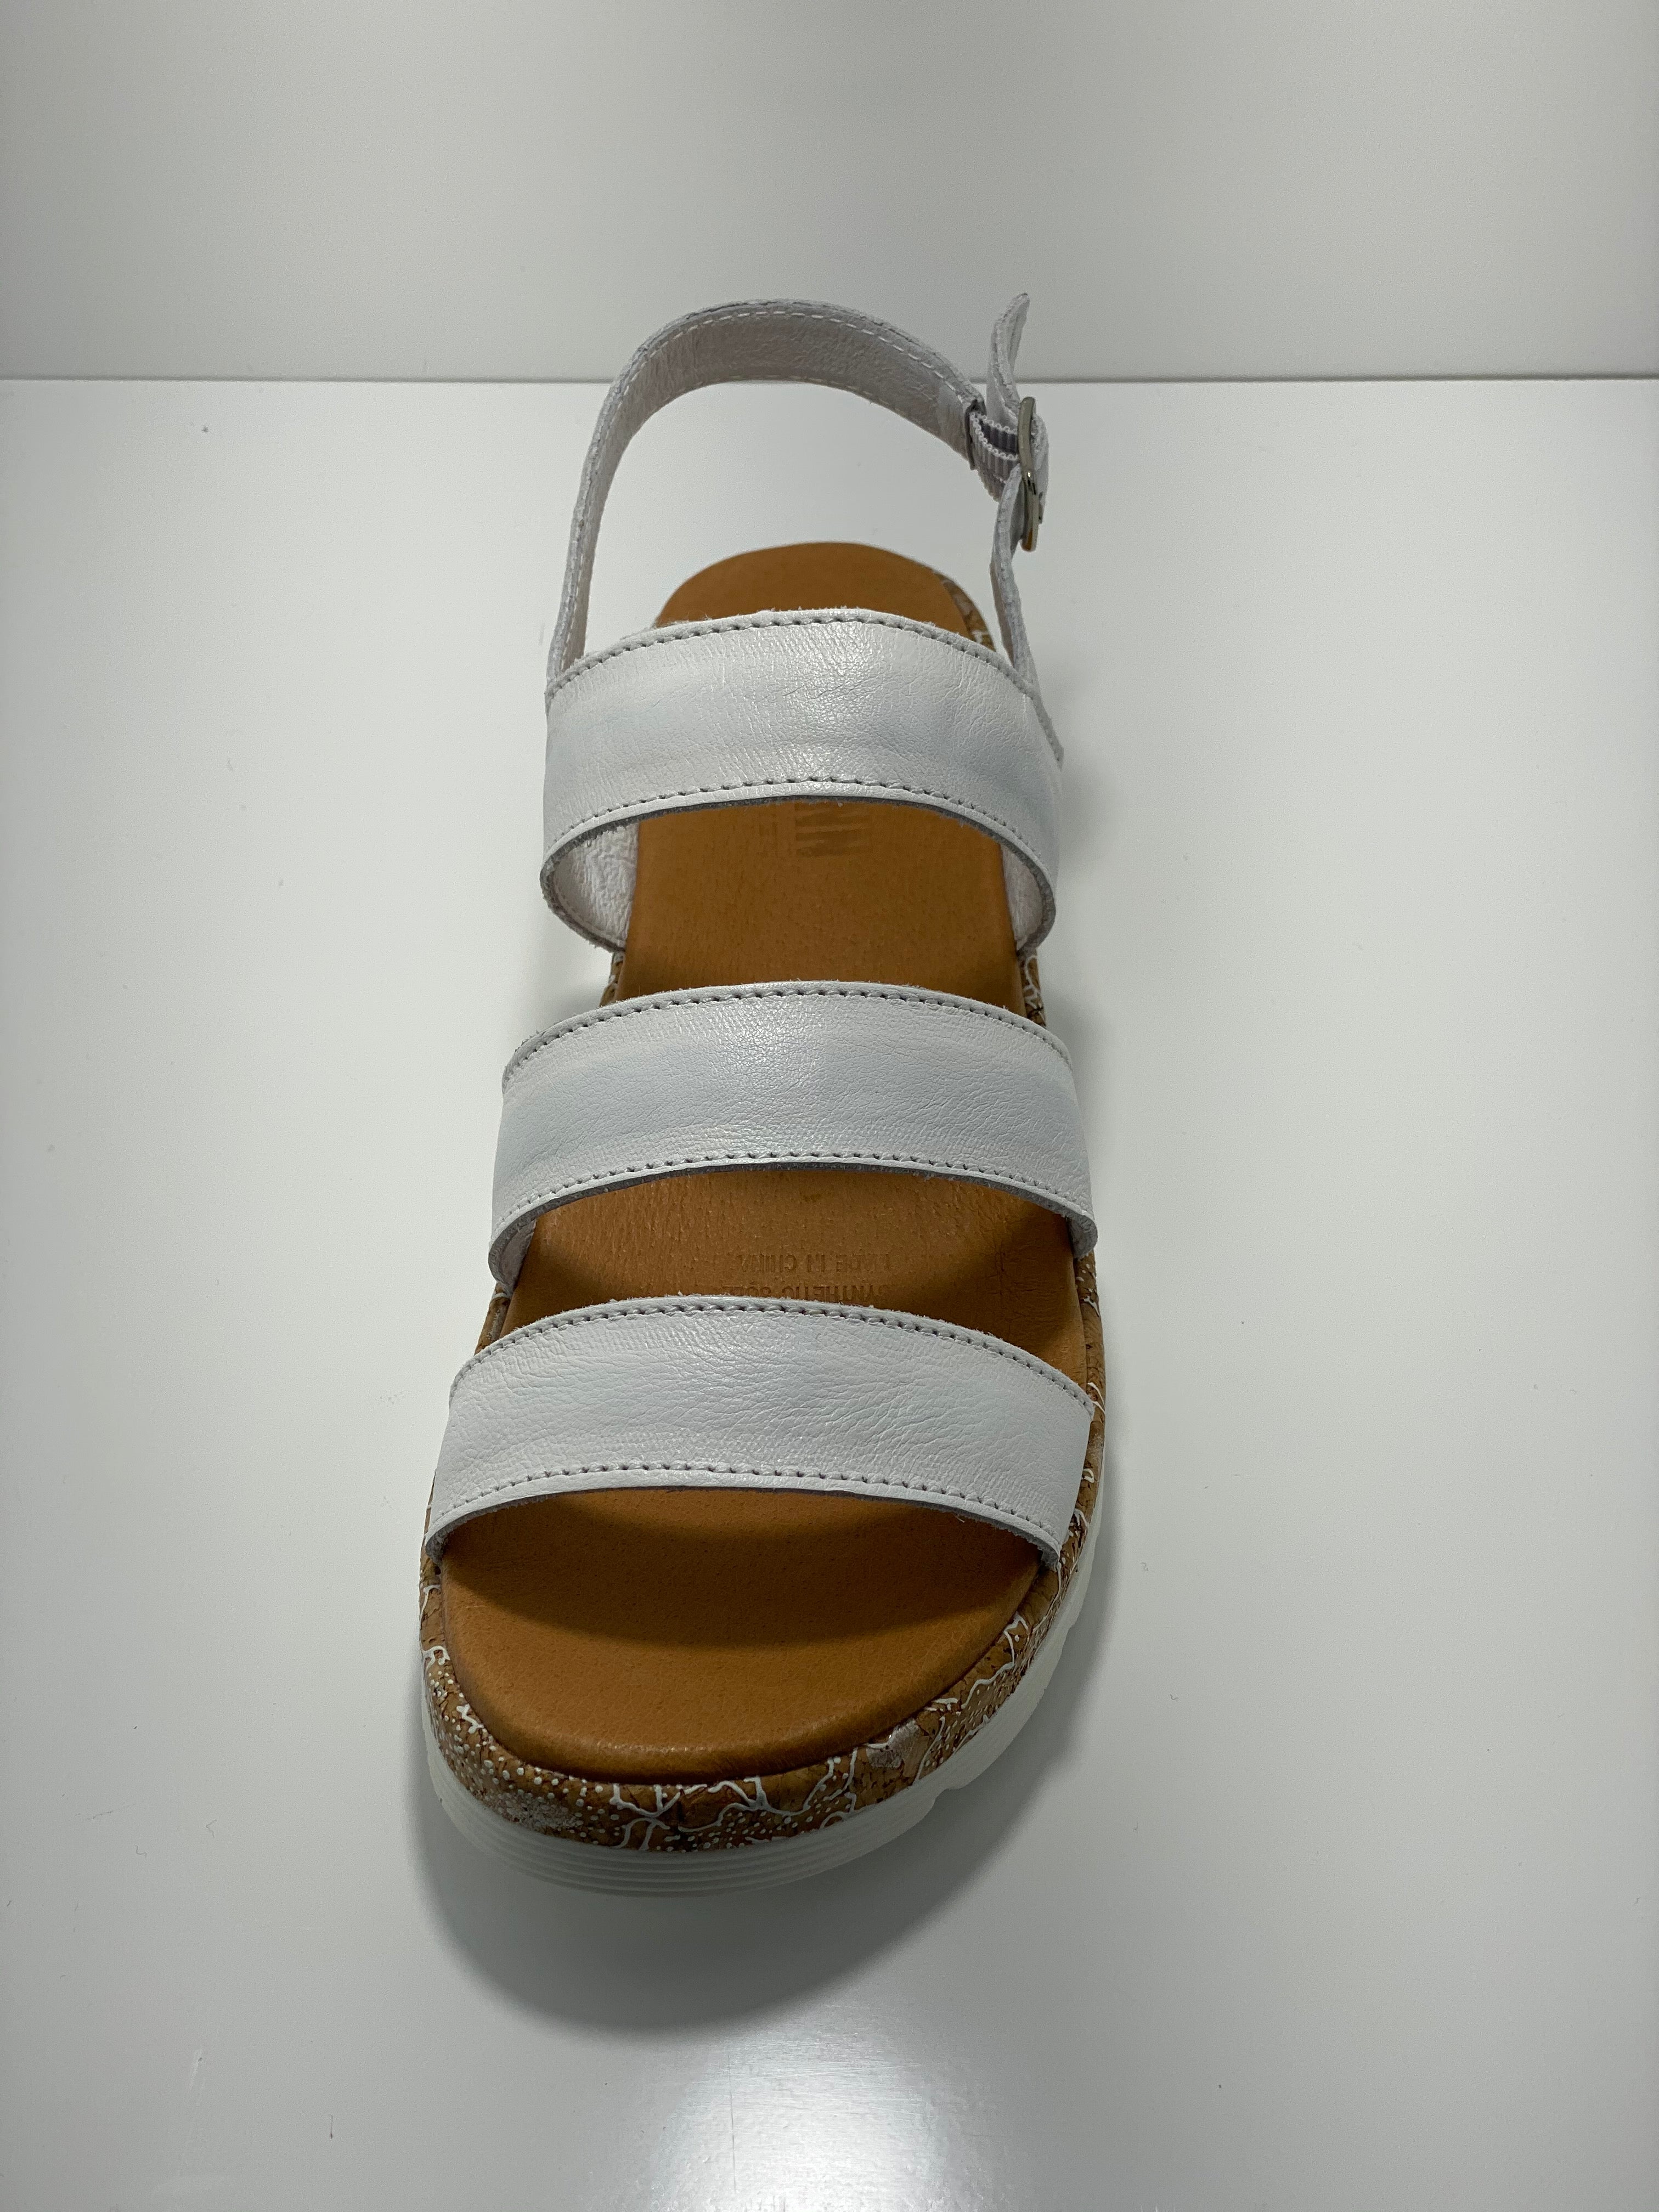 Fizzer Sandle with Buckle